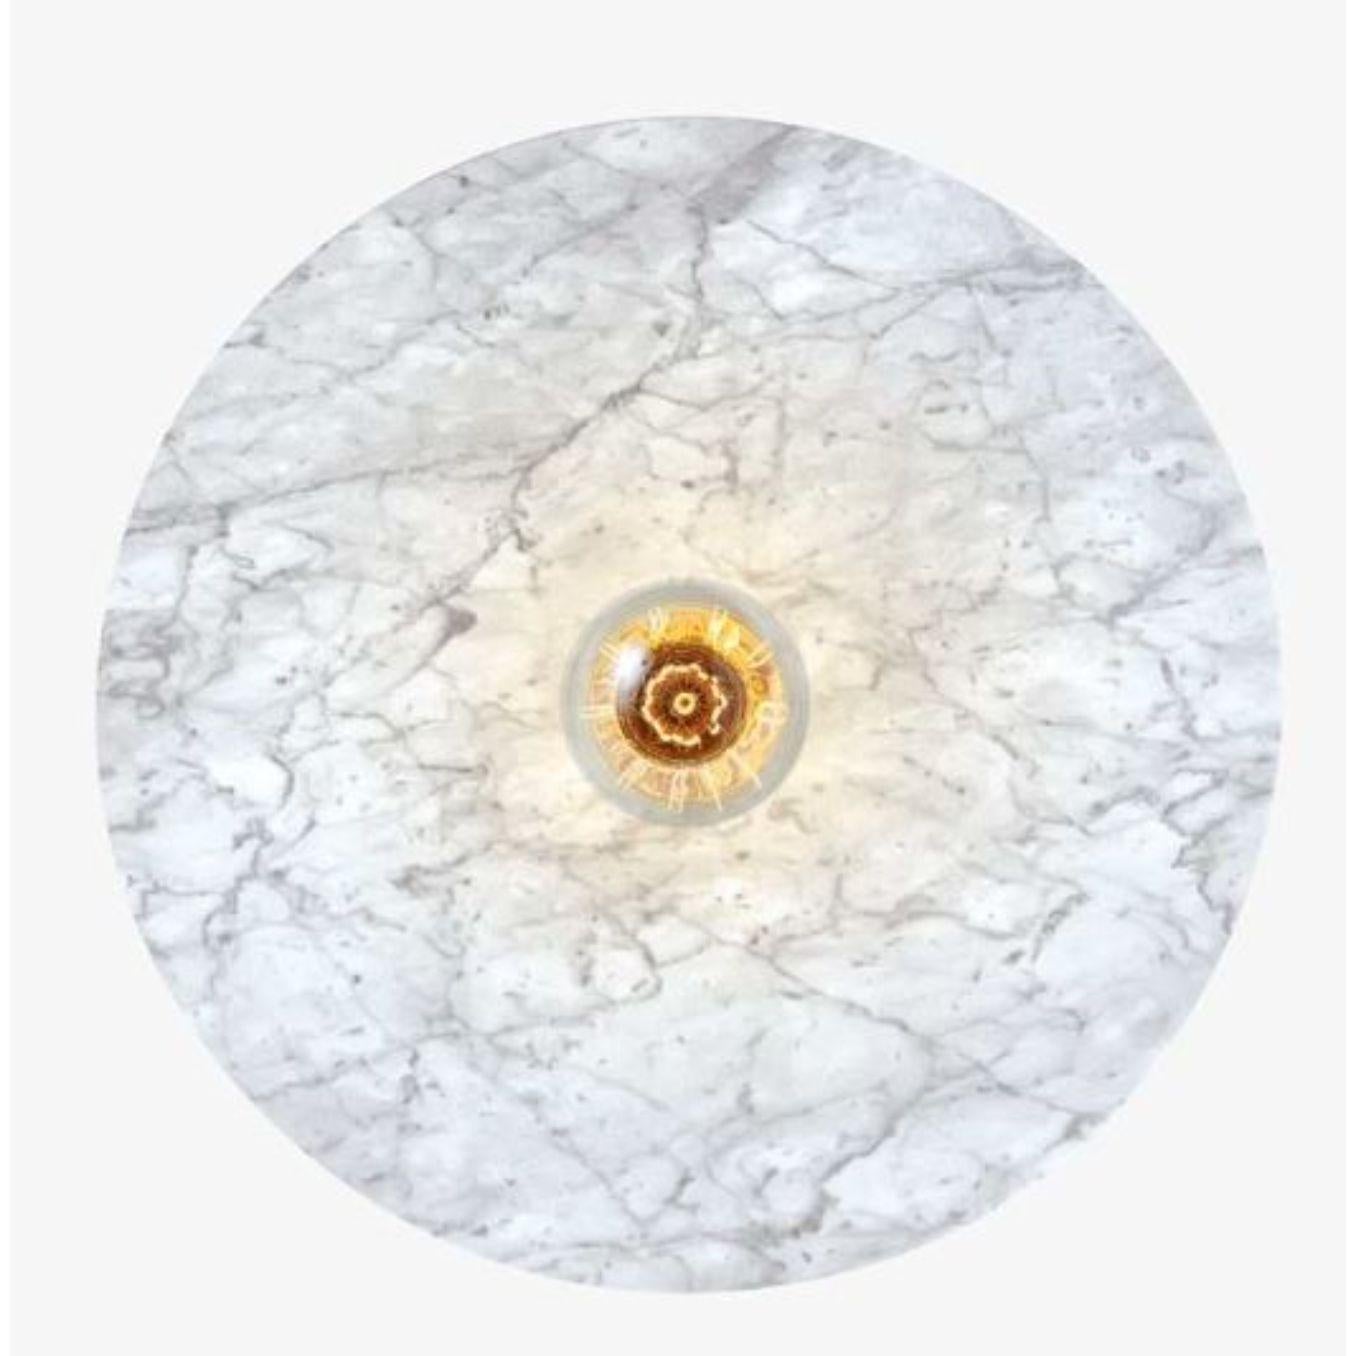 Venus wall light by RADAR.
Design: Bastien Taillard
Materials: White Carrara marble, matte black thermolacquered metal structure, matt white thermo lacquered front ring.
Dimensions: depth 10 x diameter 60 cm.

All our lamps can be wired